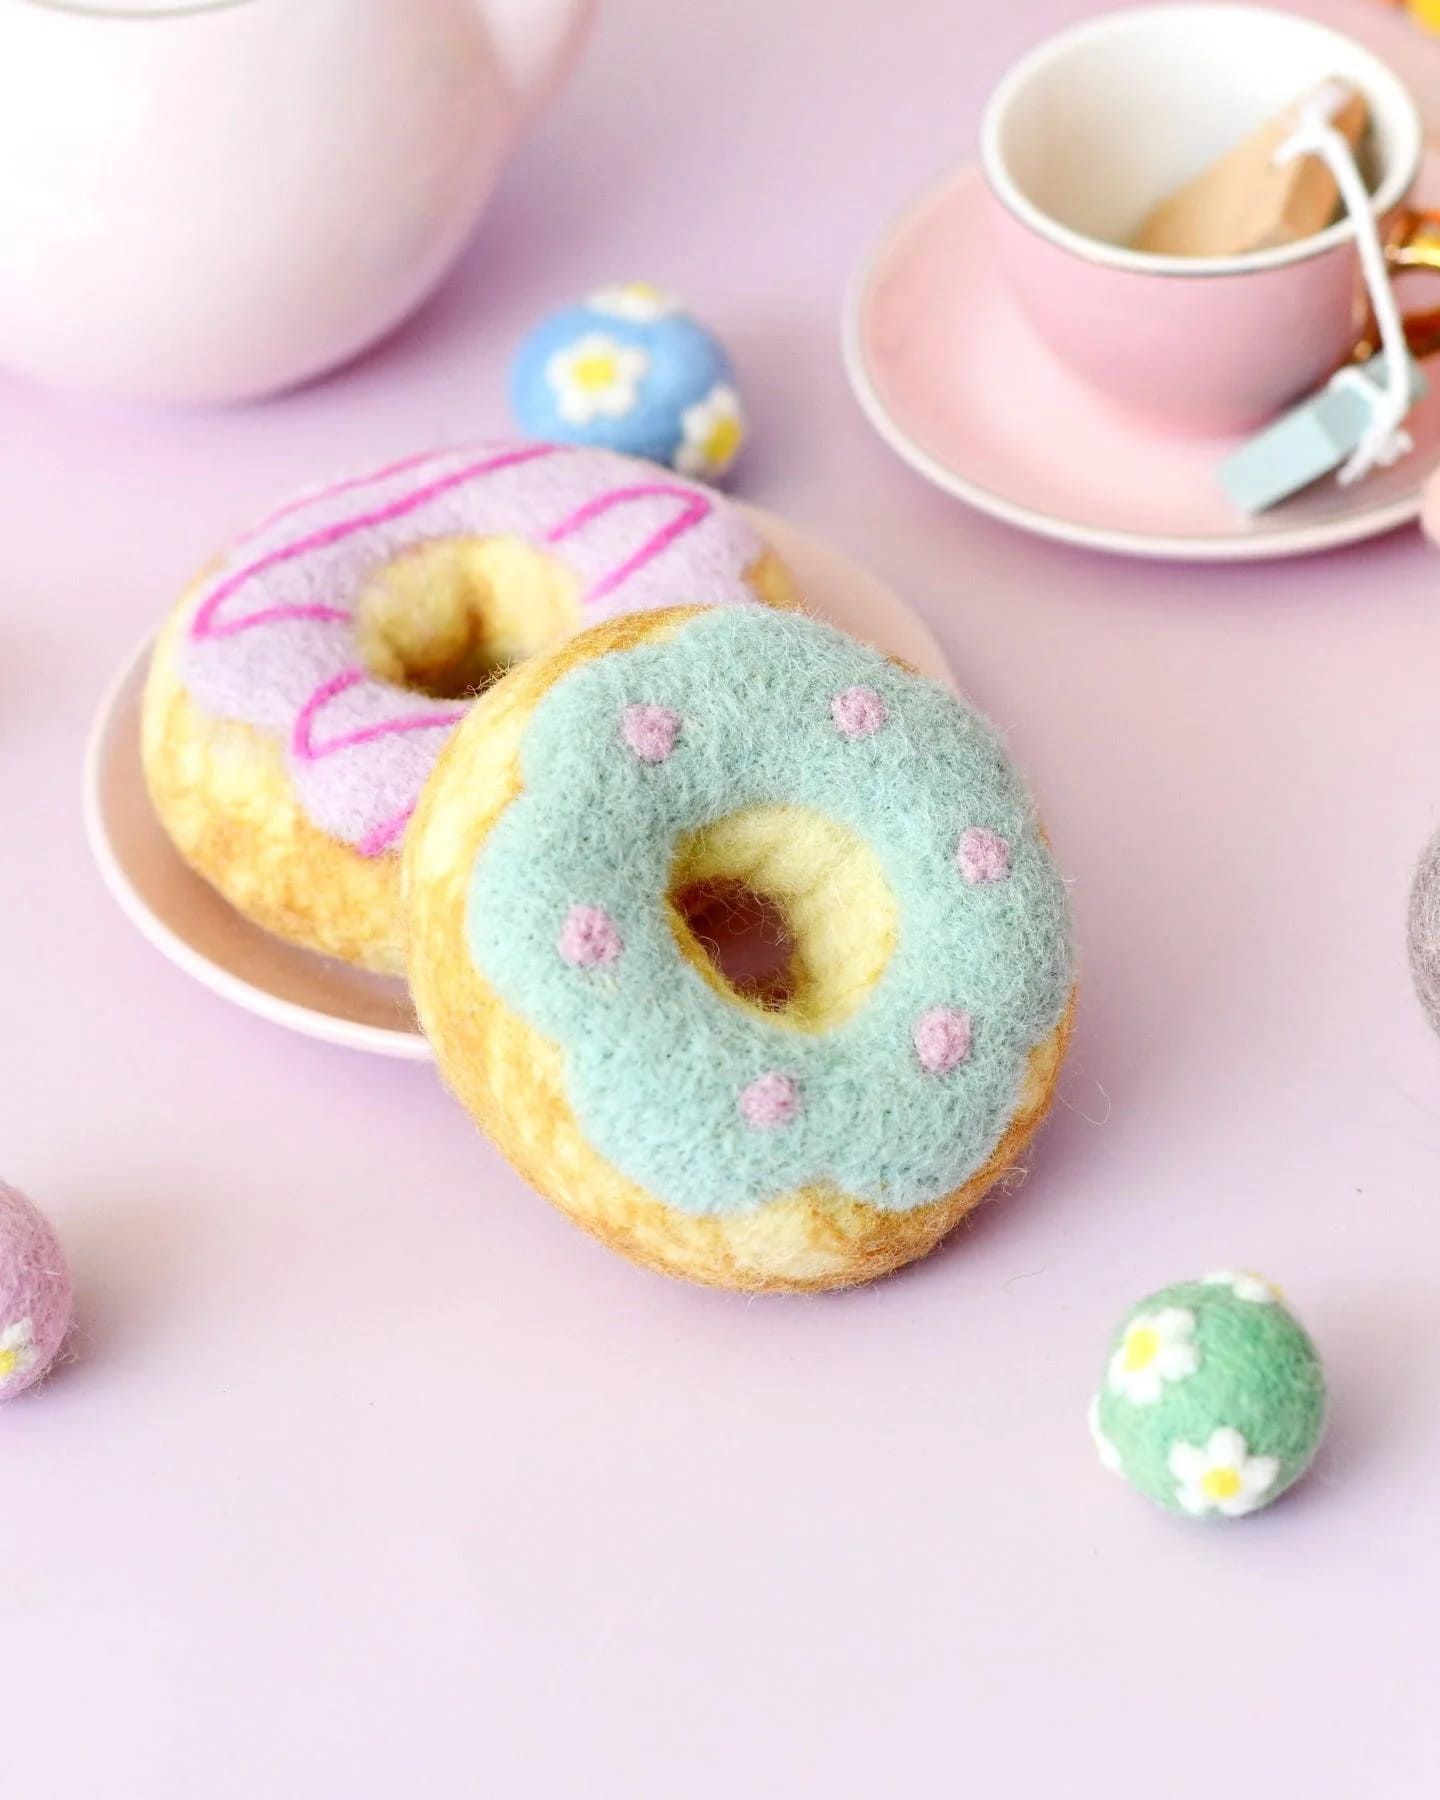 Tara Treasures Felt Doughnut (Donut) with Pastel Blue Frosting and Pink Dots